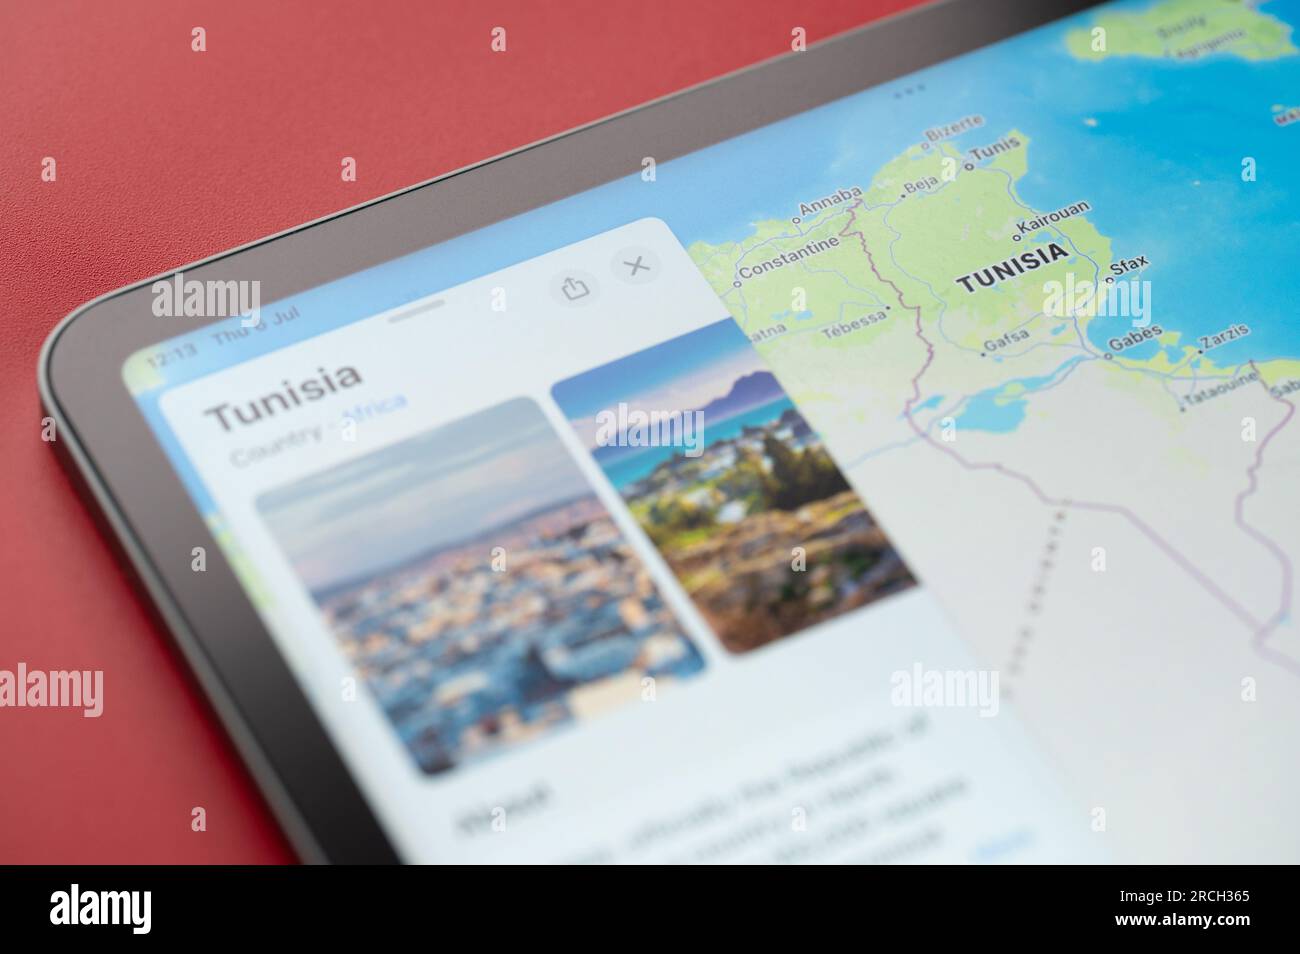 New York, USA - July 6, 2023: Tunisia country with Tunis capital on map ipad macro close up view Stock Photo